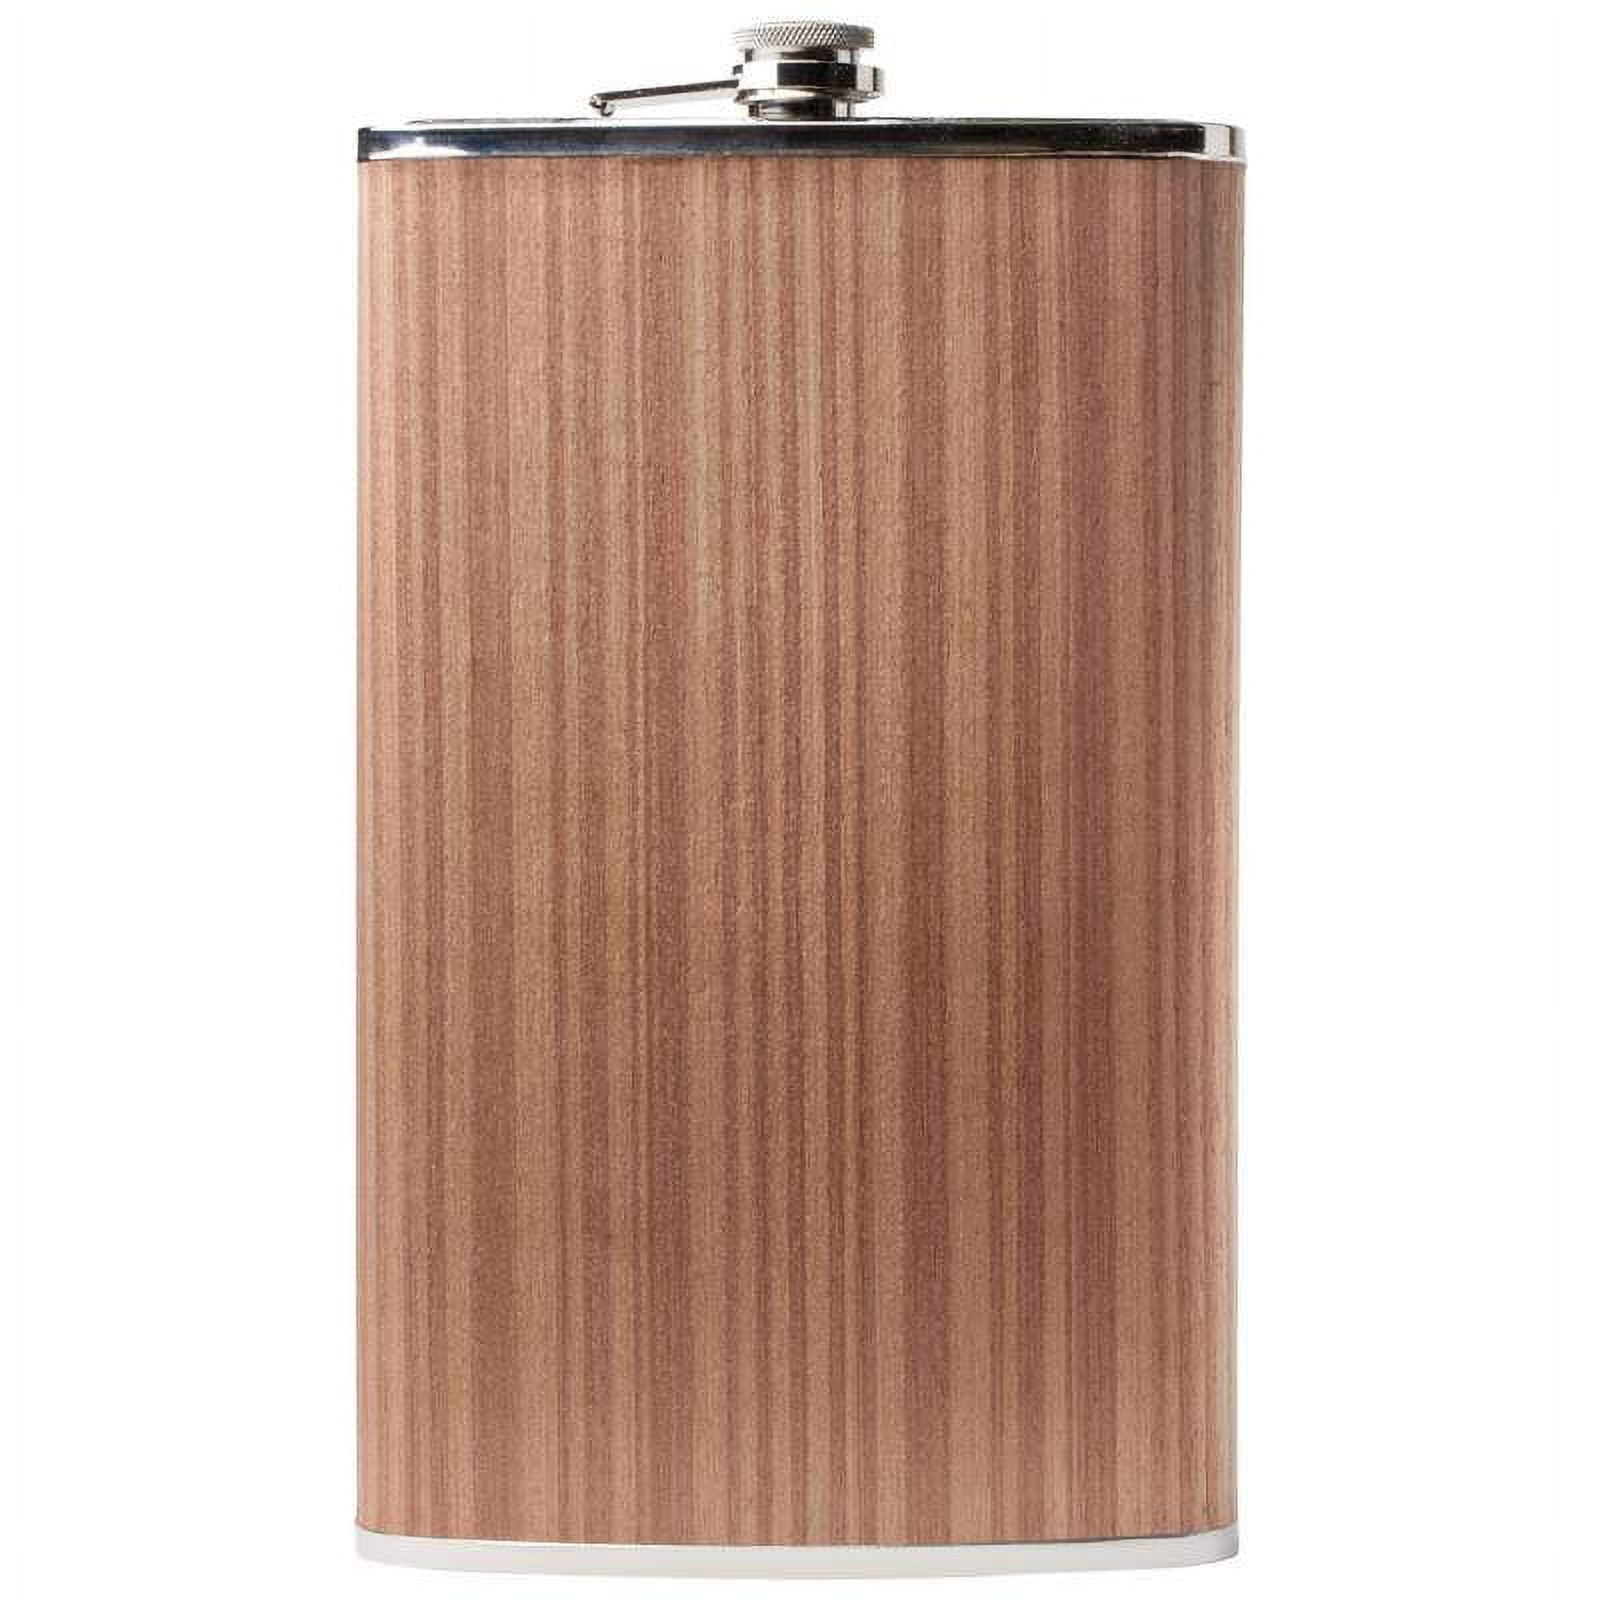 Bnf Ktflk64wd 64 Oz Stainless Steel Flask With Wood Wrap